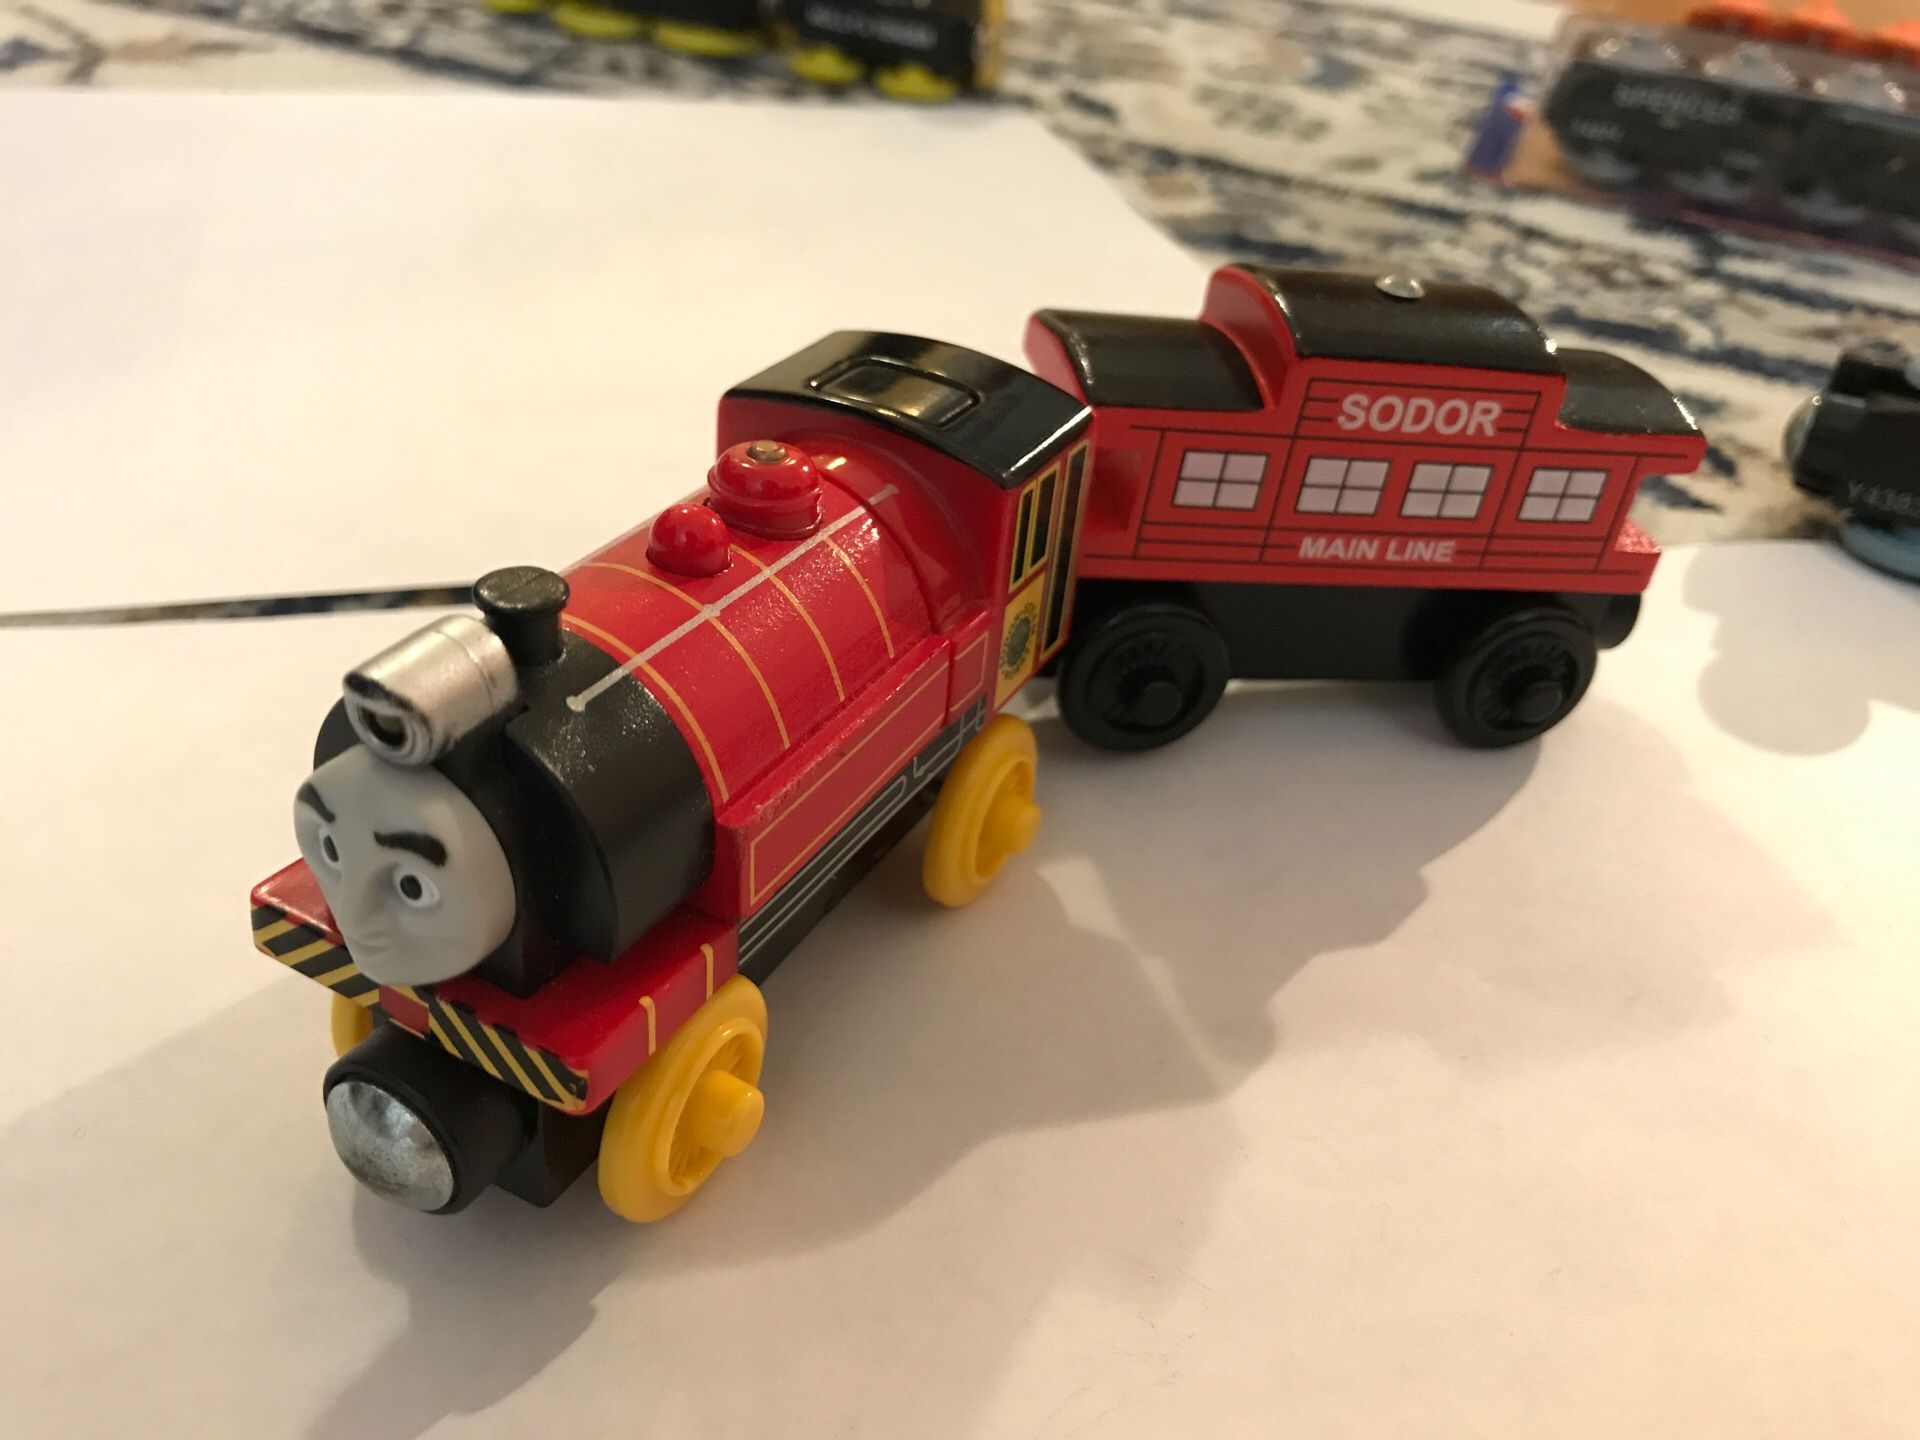 Thomas and his Friends. Wooden Railway Tank Engine - VICTOR AND SODOR LINE CABOOSE